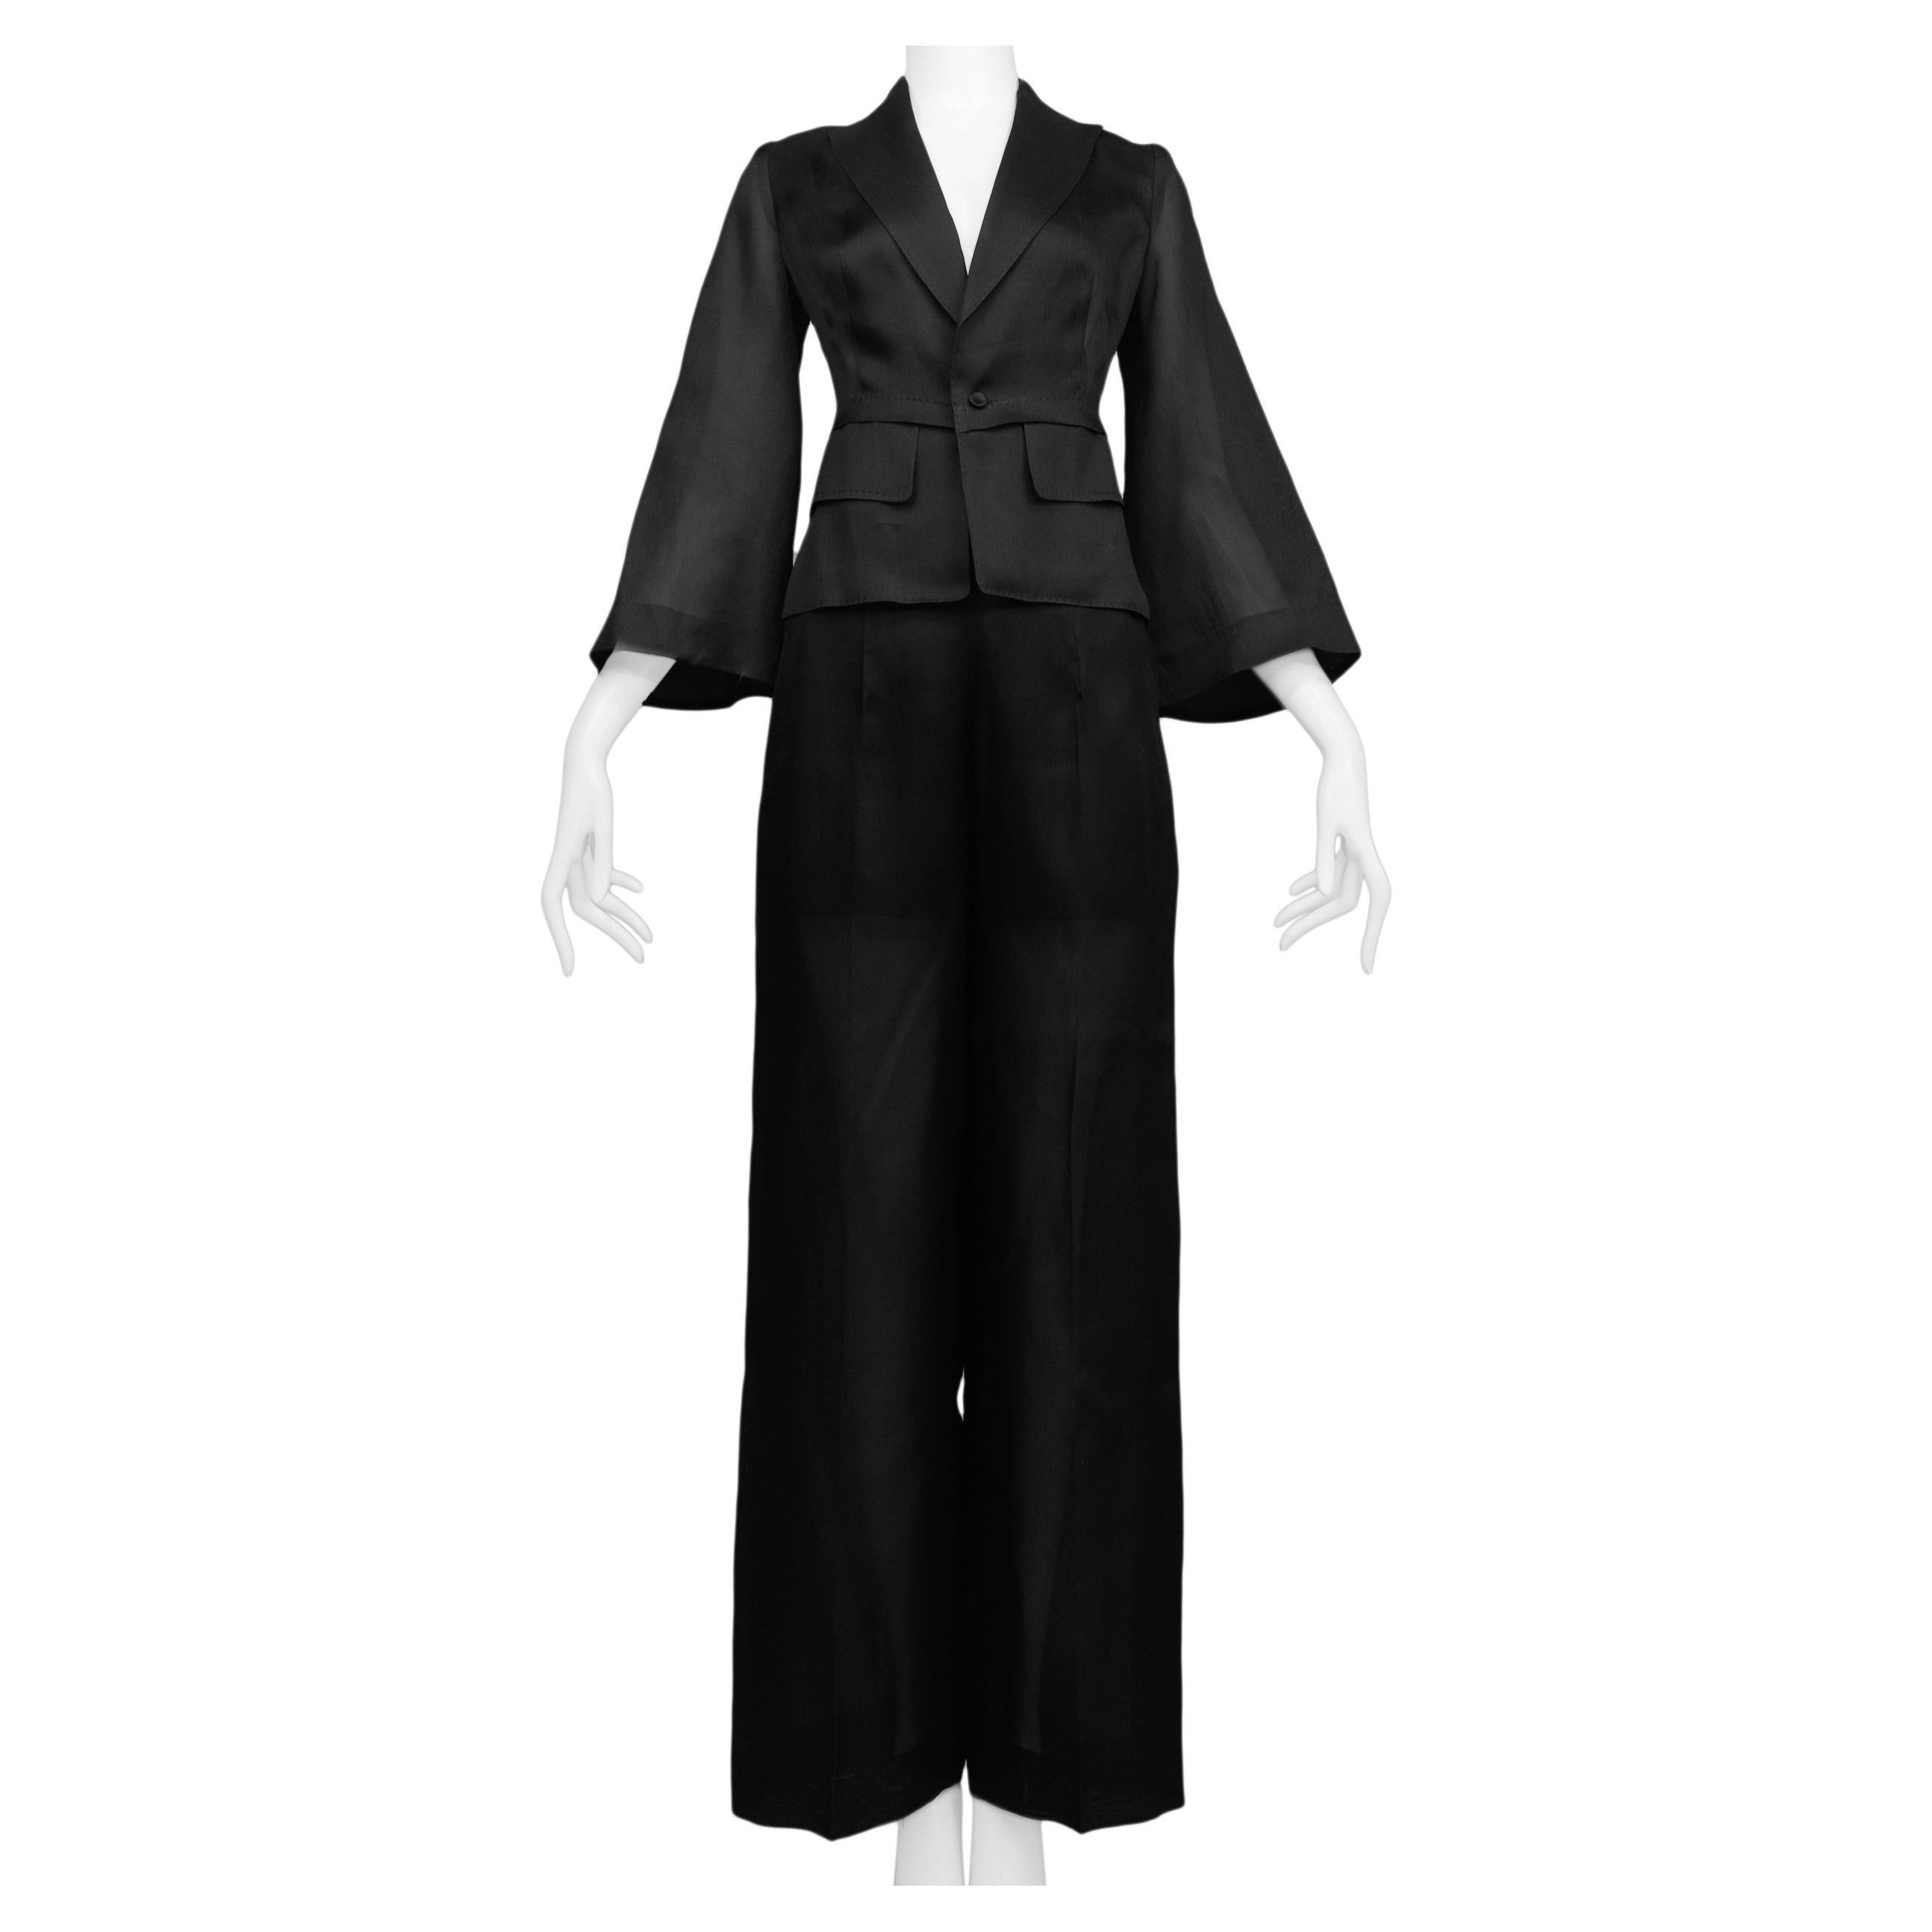 Gianfranco Ferre Black Sheer Pantsuit With Bell Sleeves For Sale